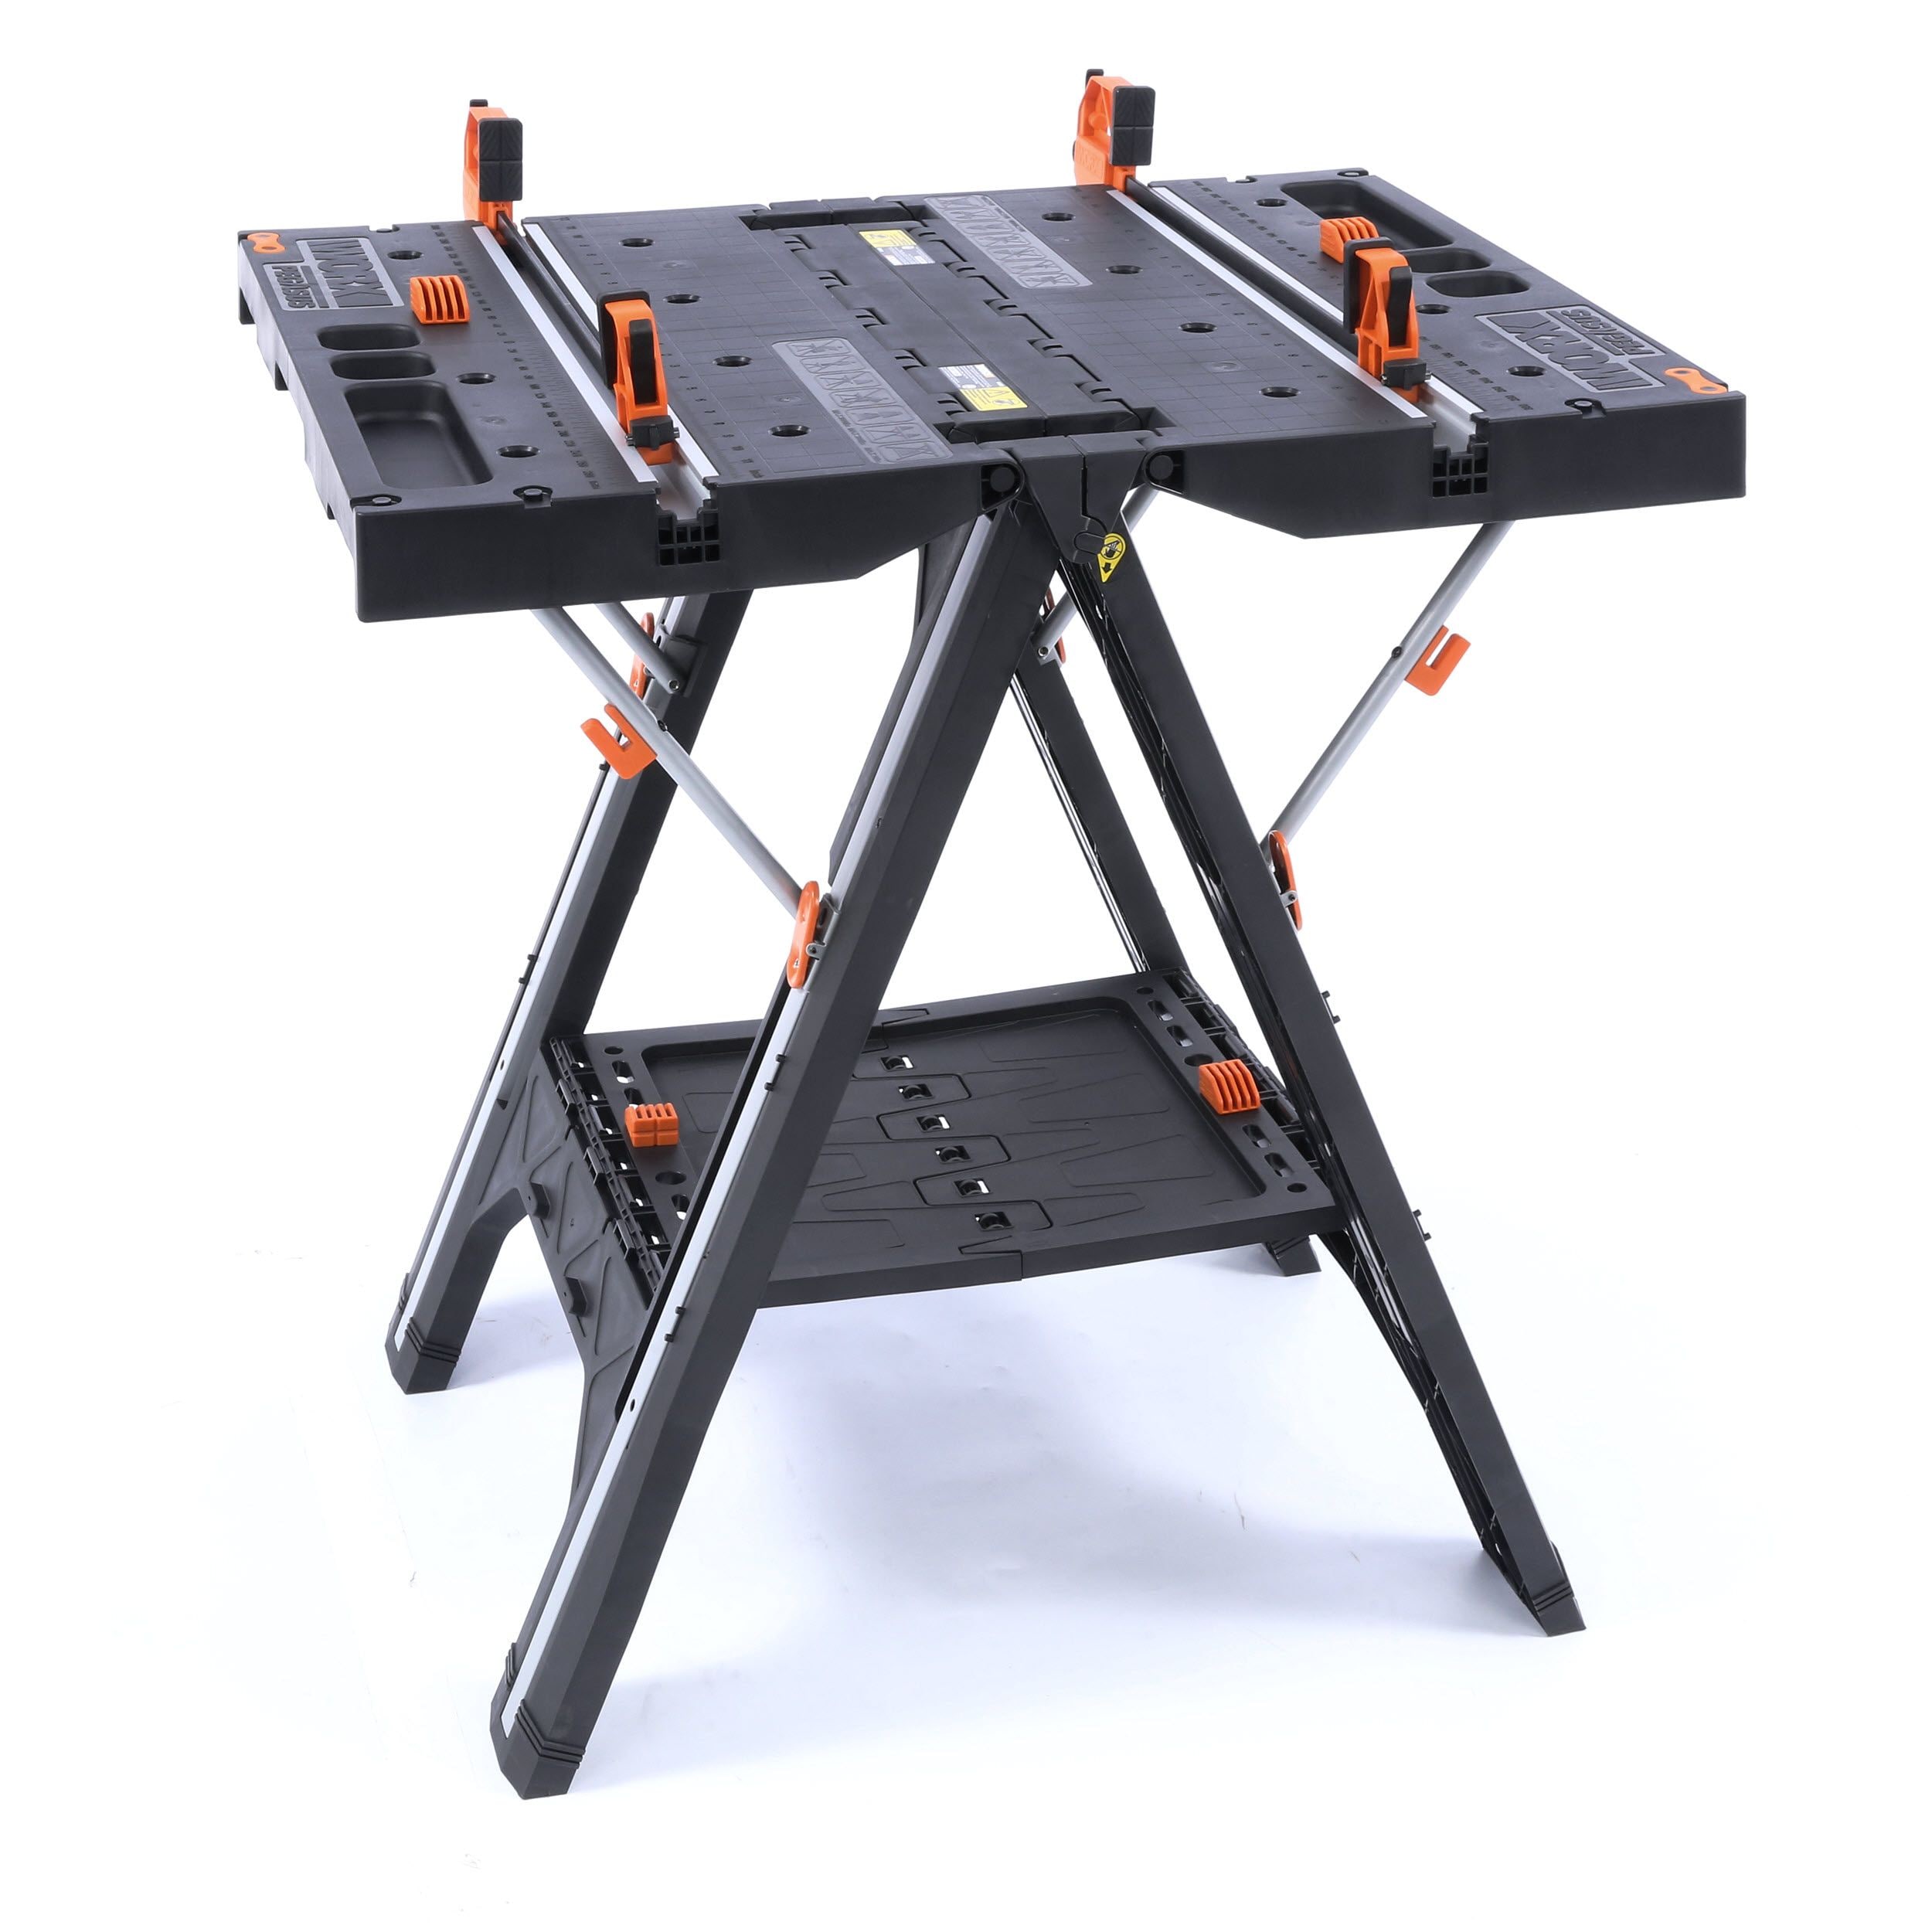 Worx Work Table Multi-Function Pre-Assembled Cast Polymers Top Steel Frame 